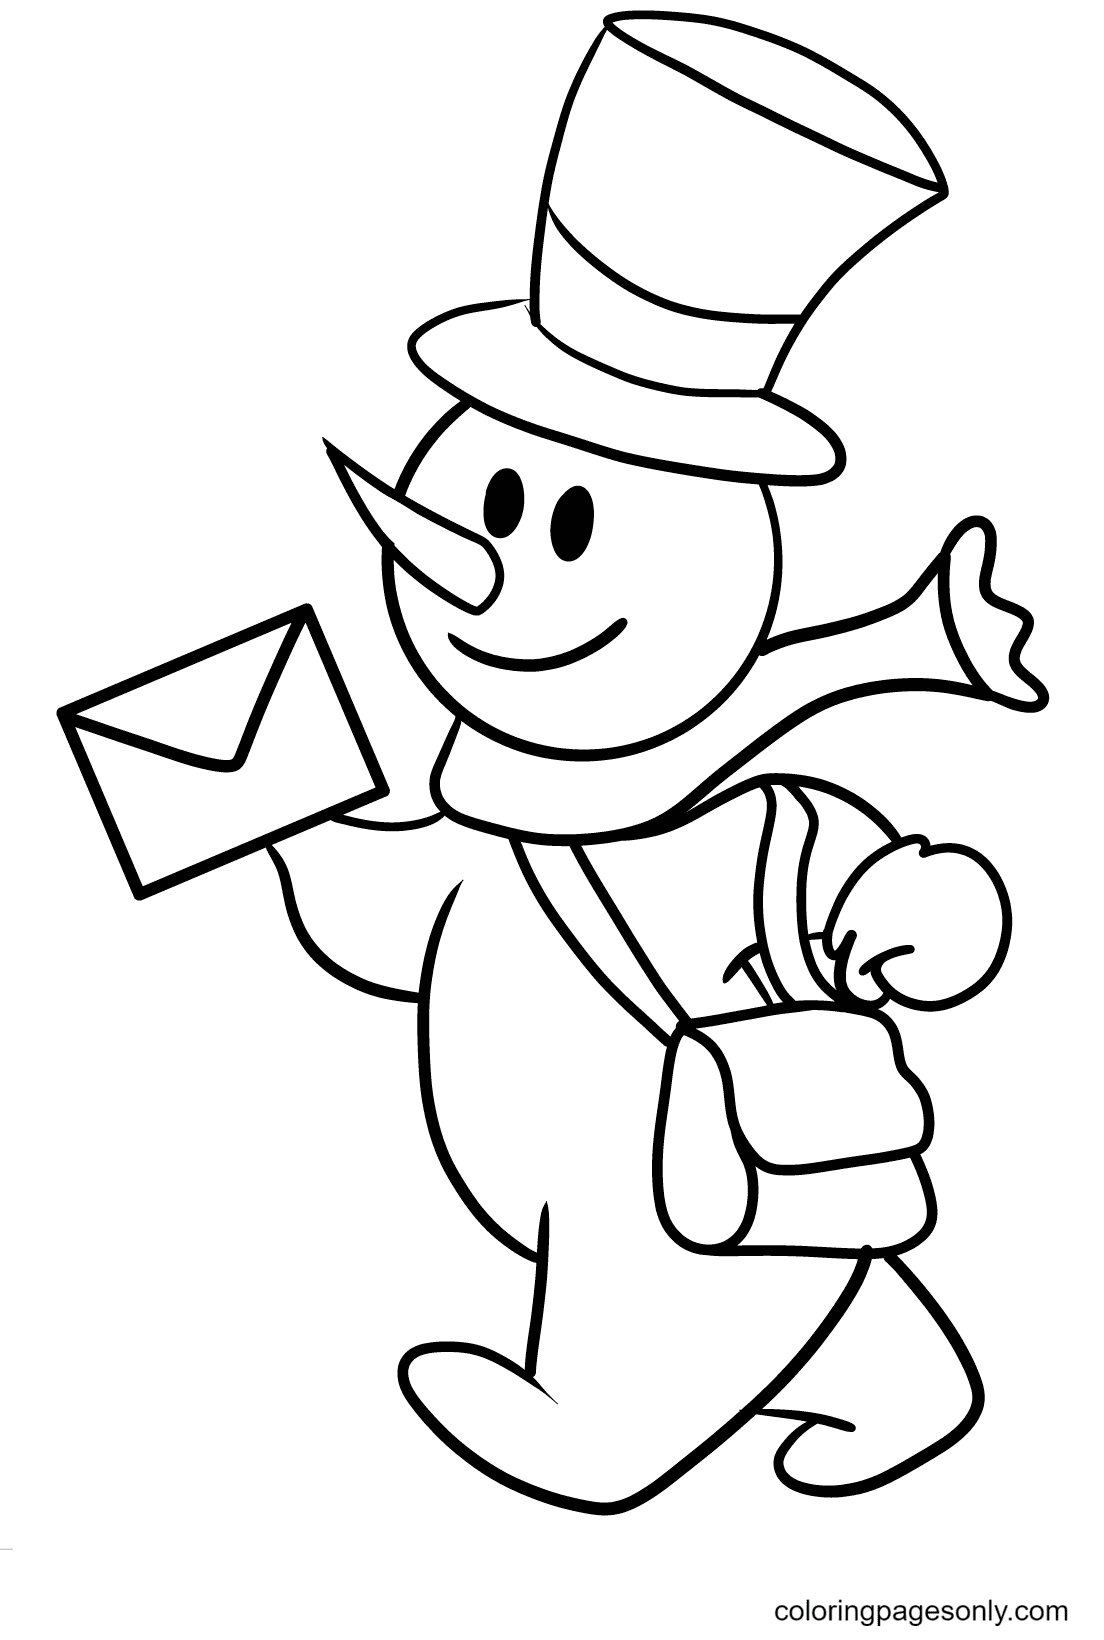 Post Office Snowman Coloring Page